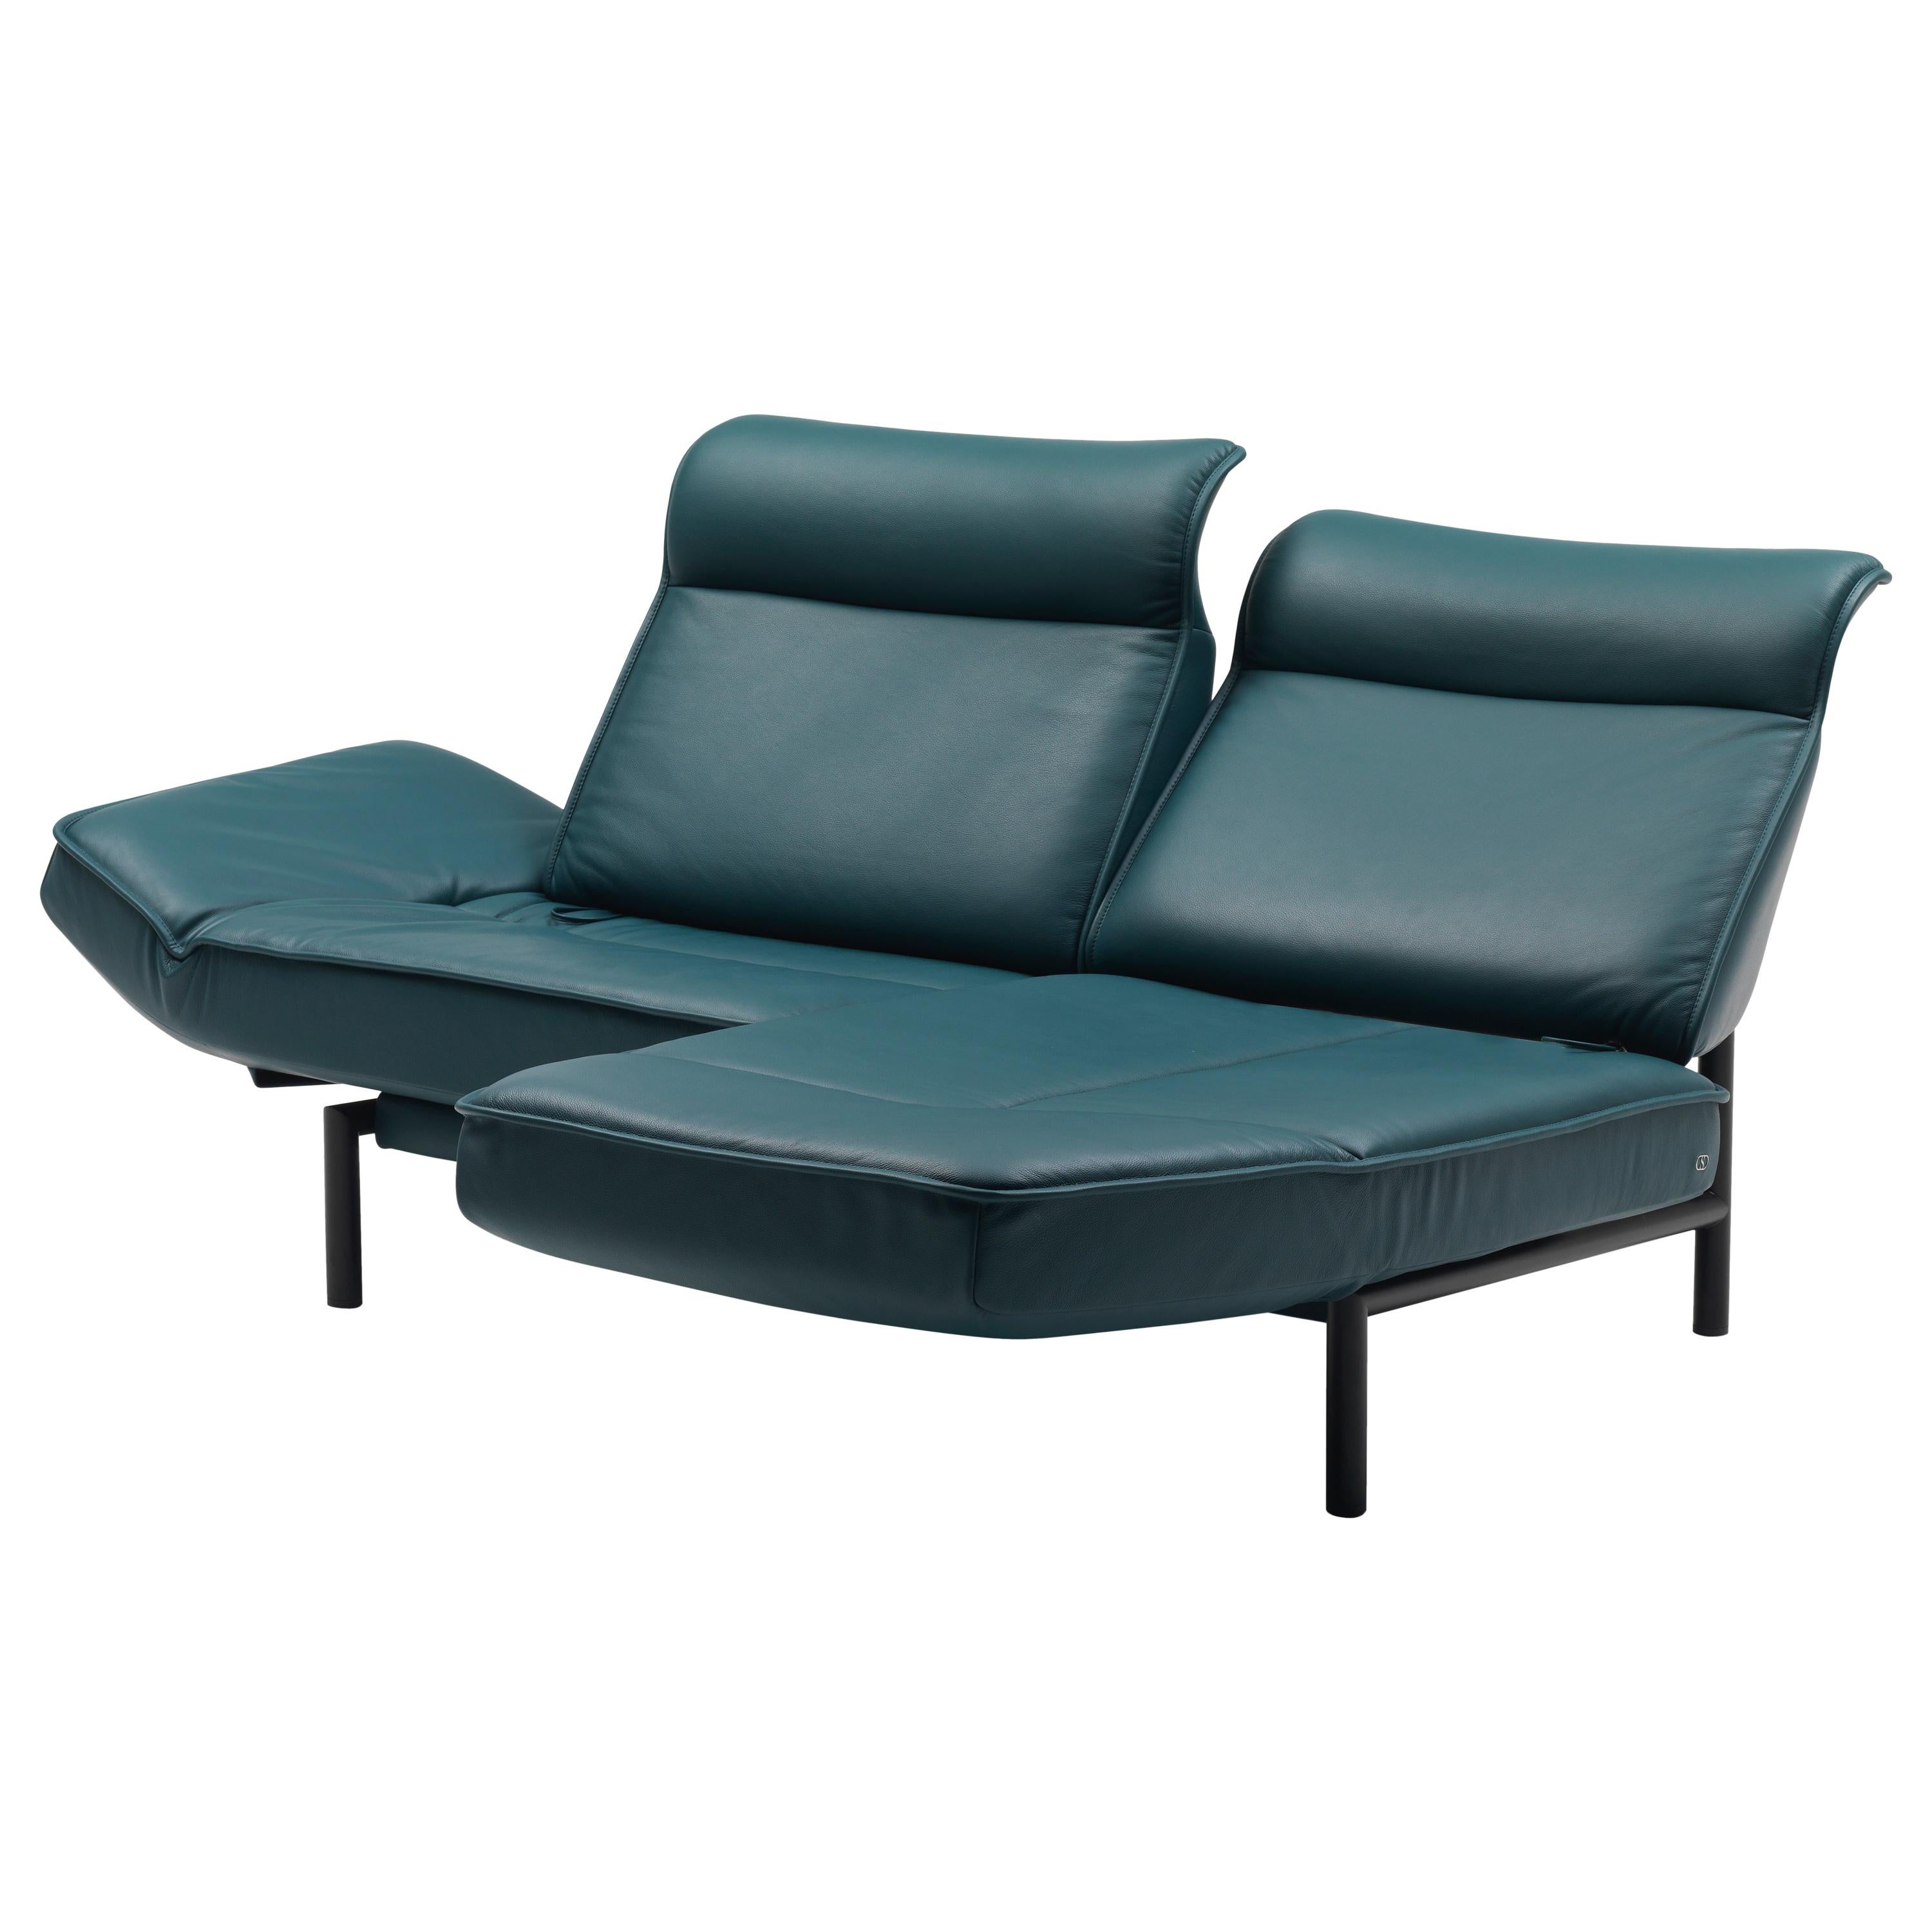 DS-450 Adjustable Leather Modern Sofa or Armchair by De Sede